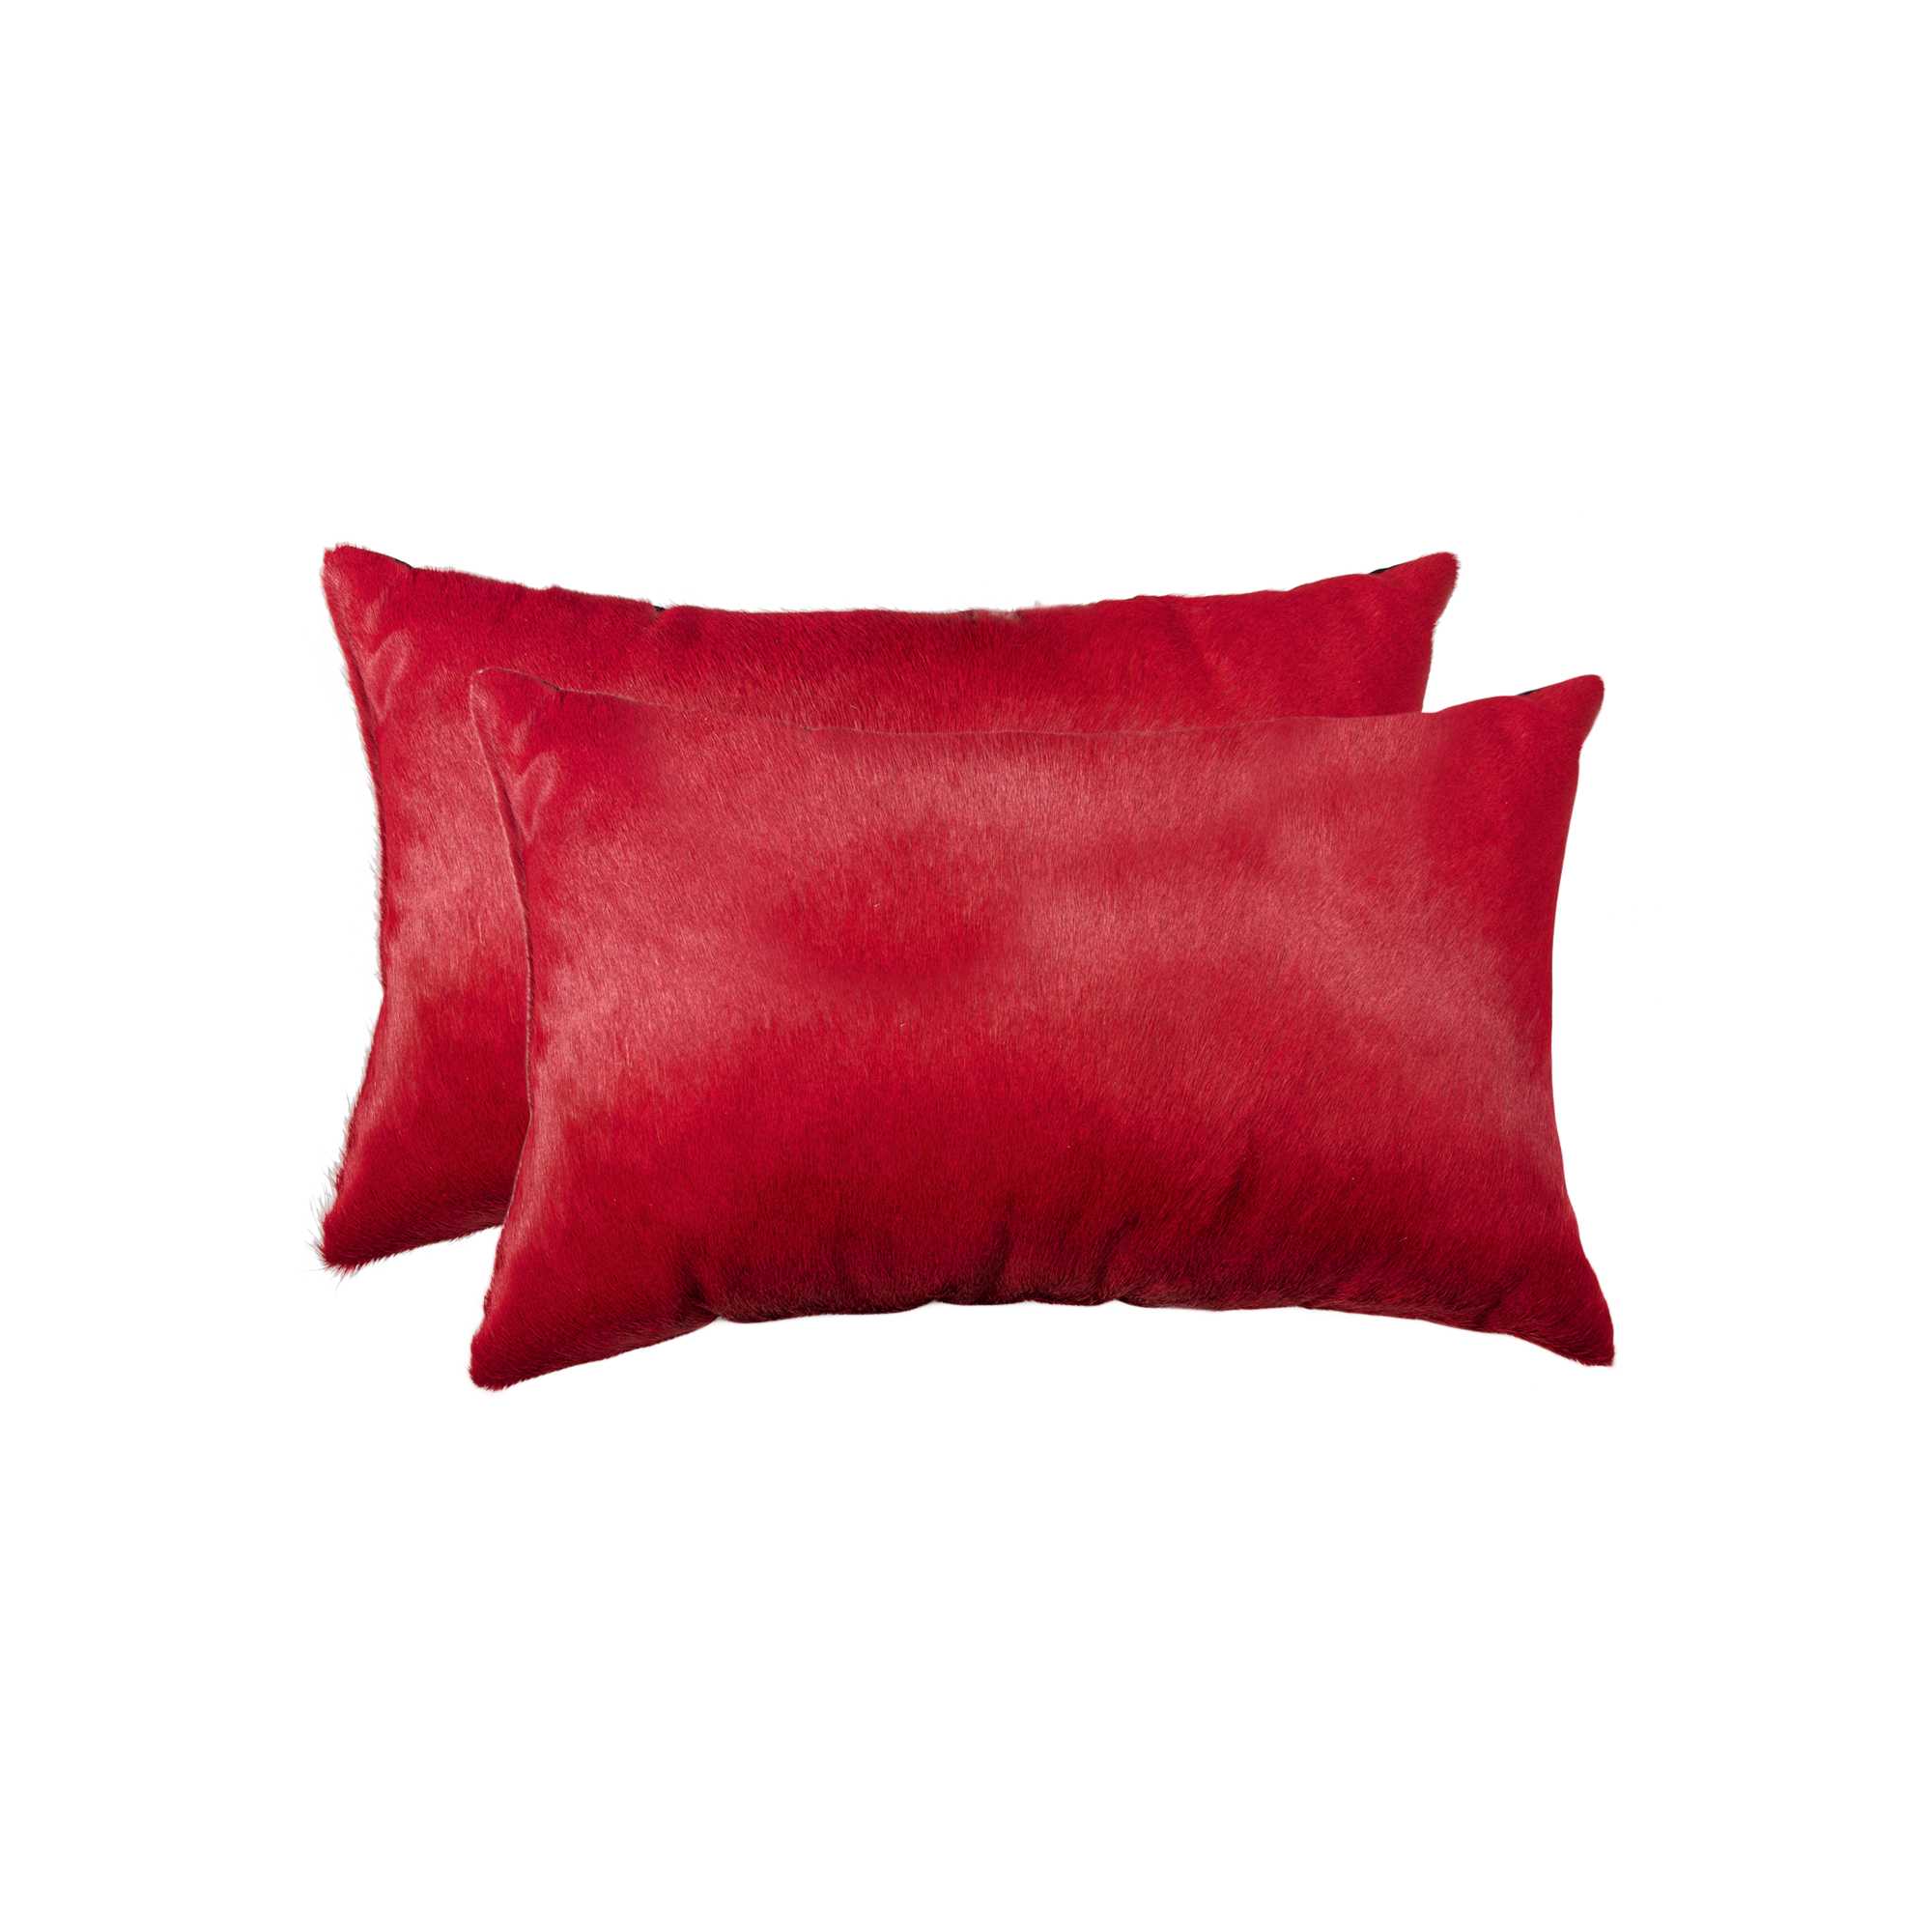 12" x 20" x 5" Wine, Cowhide - Pillow 2-Pack